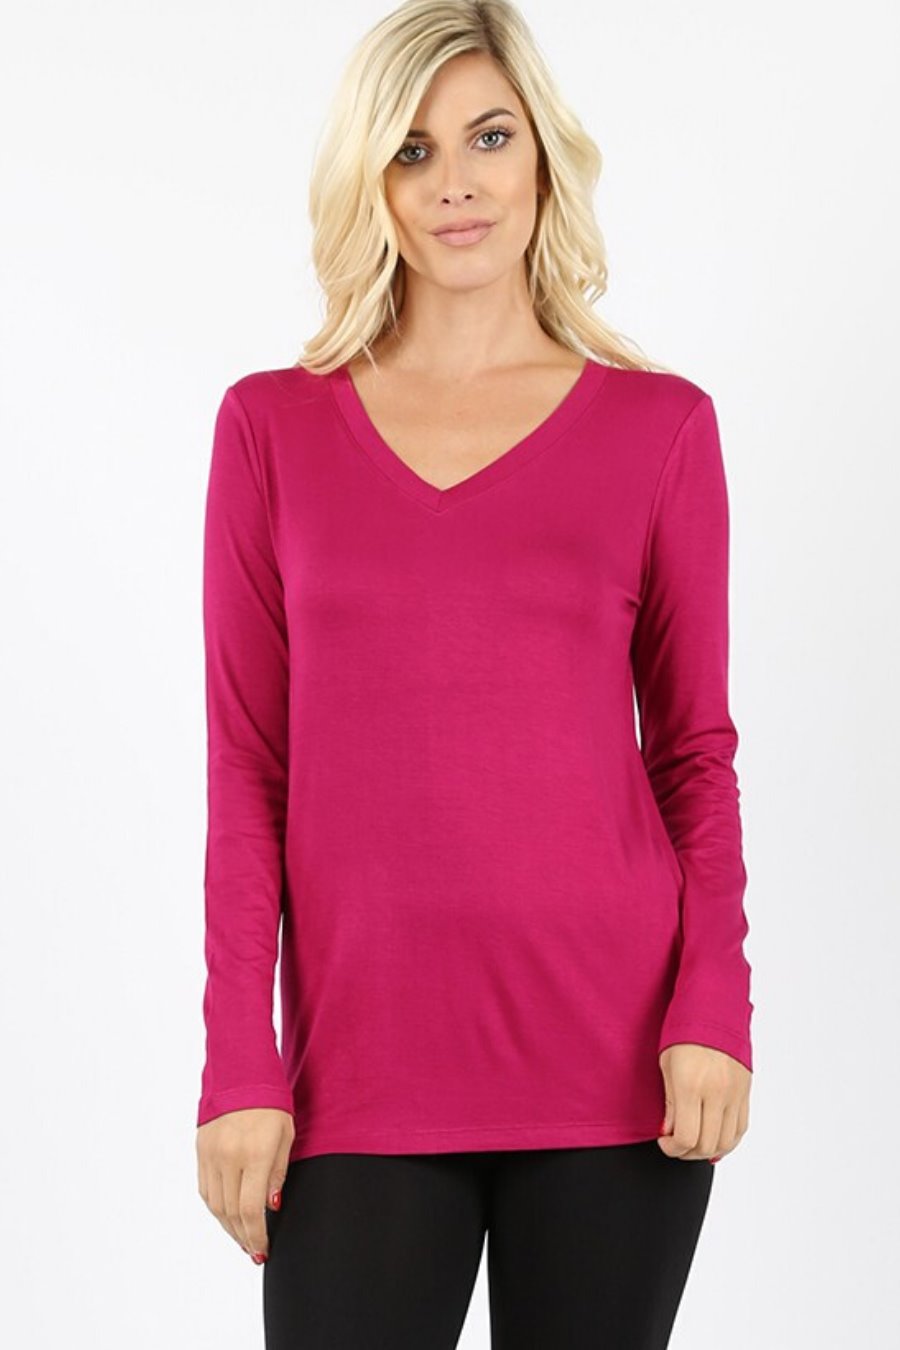 Perfect Layering Long Sleeve Tee - Jess Lea Boutique